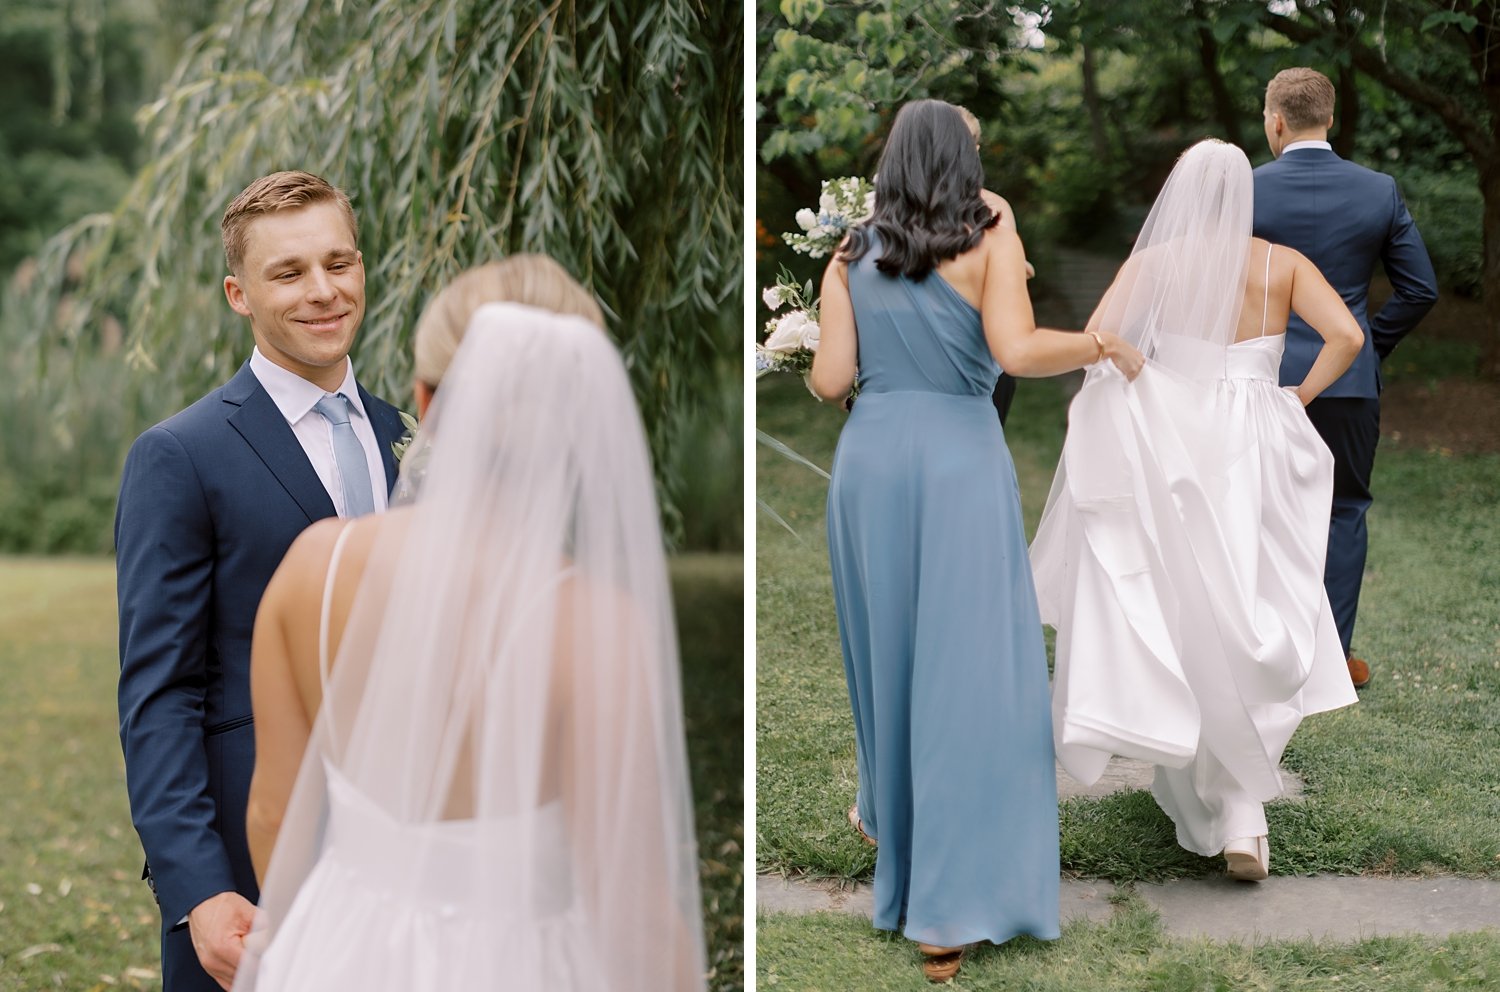 bride and groom talk while bridesmaid helps carry wedding gown